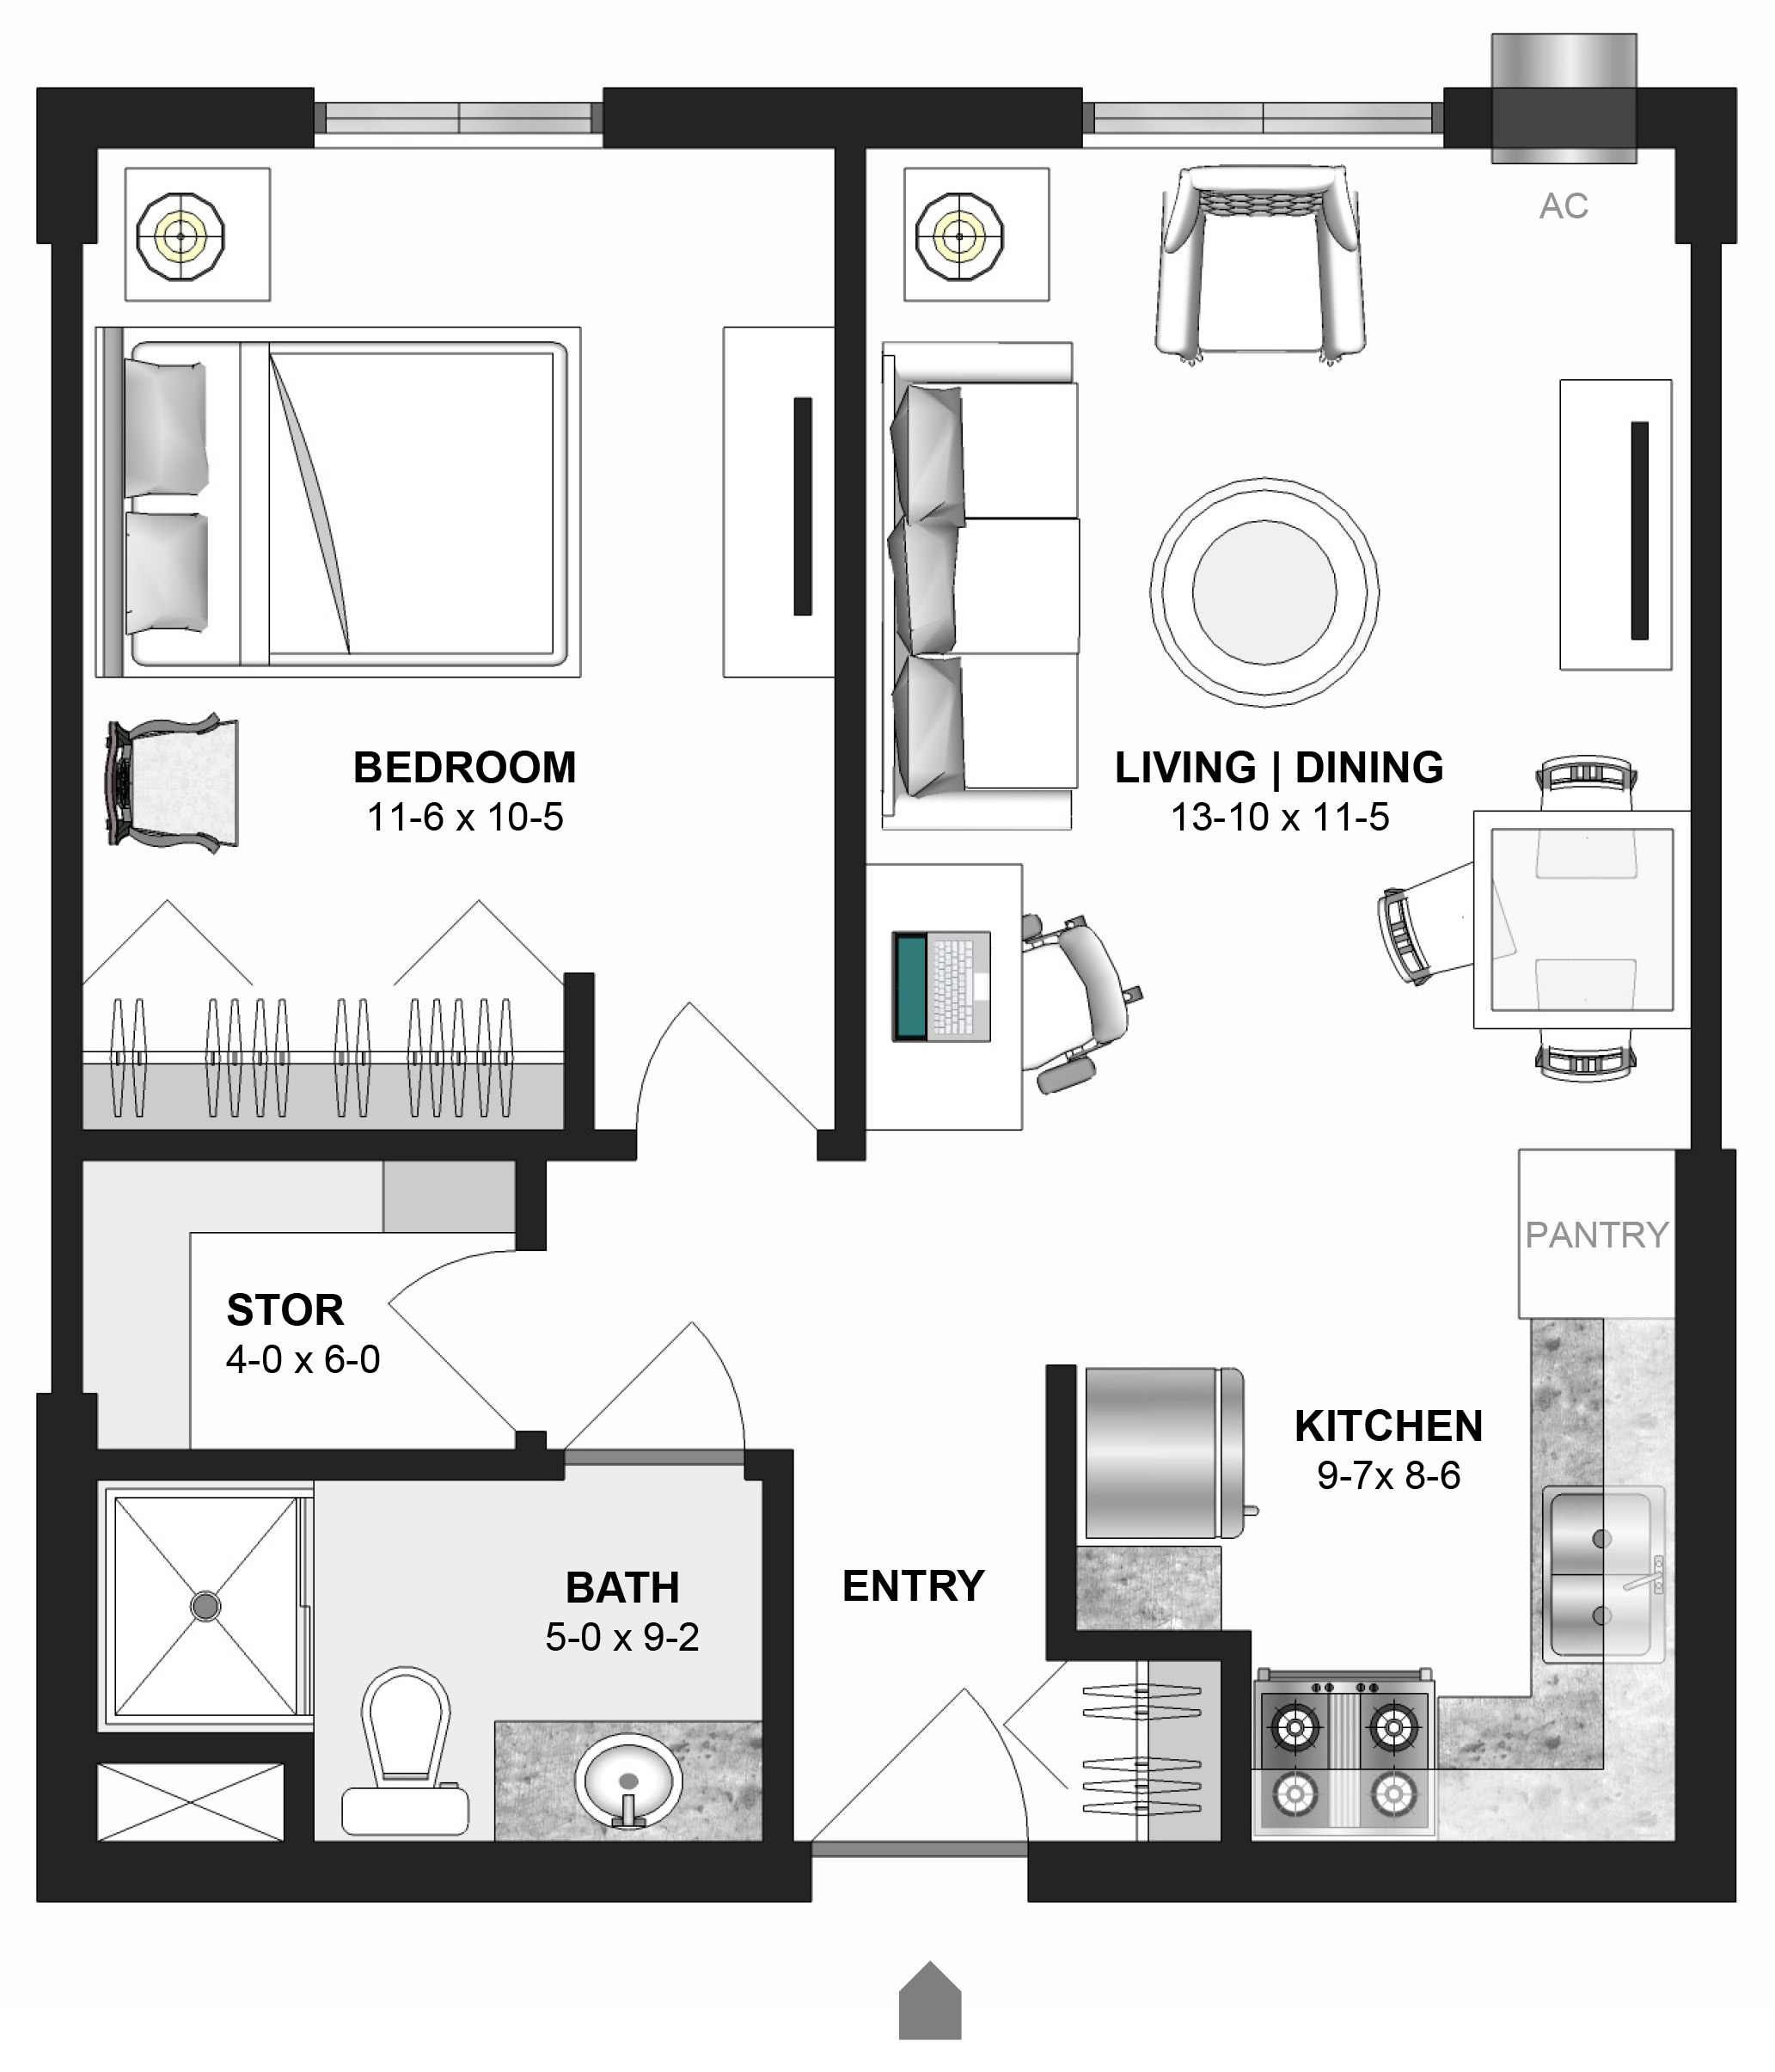 Floor plan of a 1-bedroom independent living apartment at Talheim Apartments in Chaska